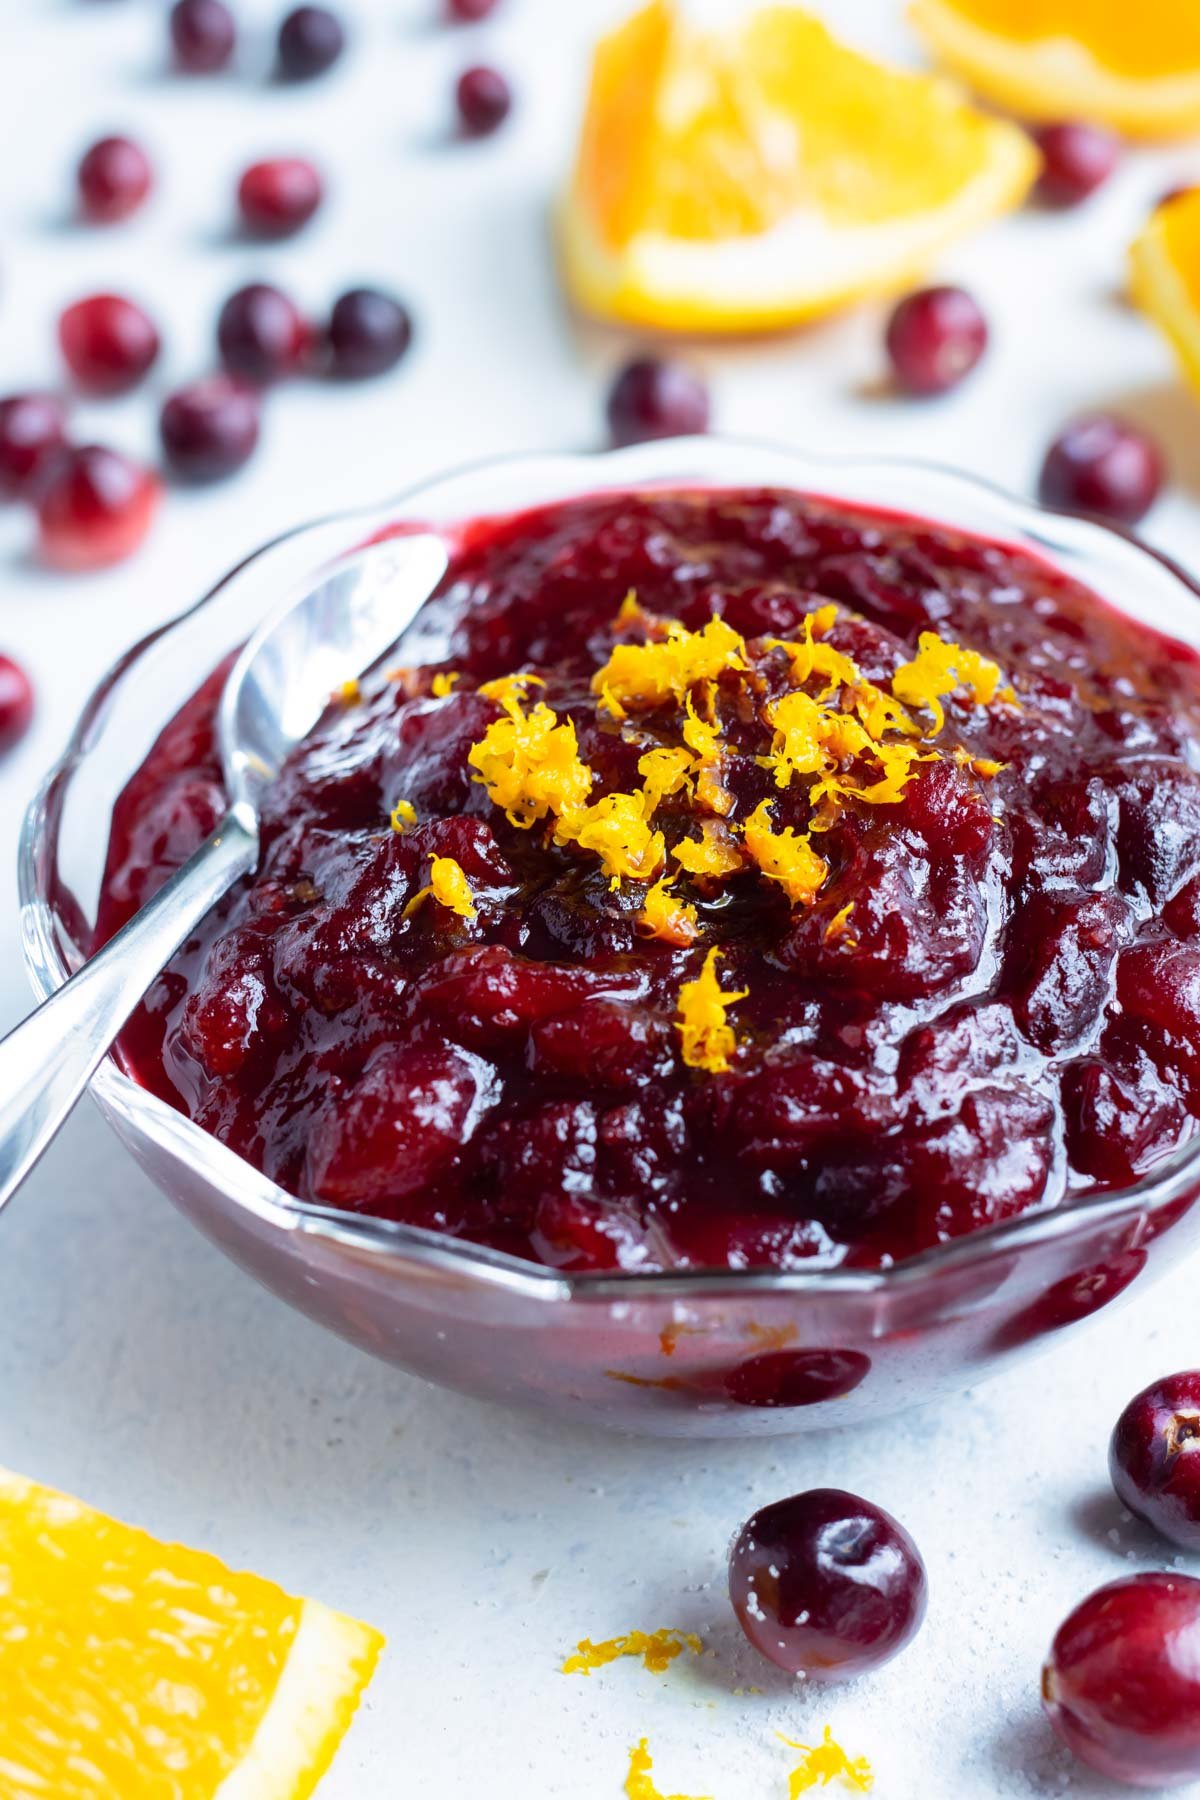 Cranberry orange sauce in a bowl is set on the counter.